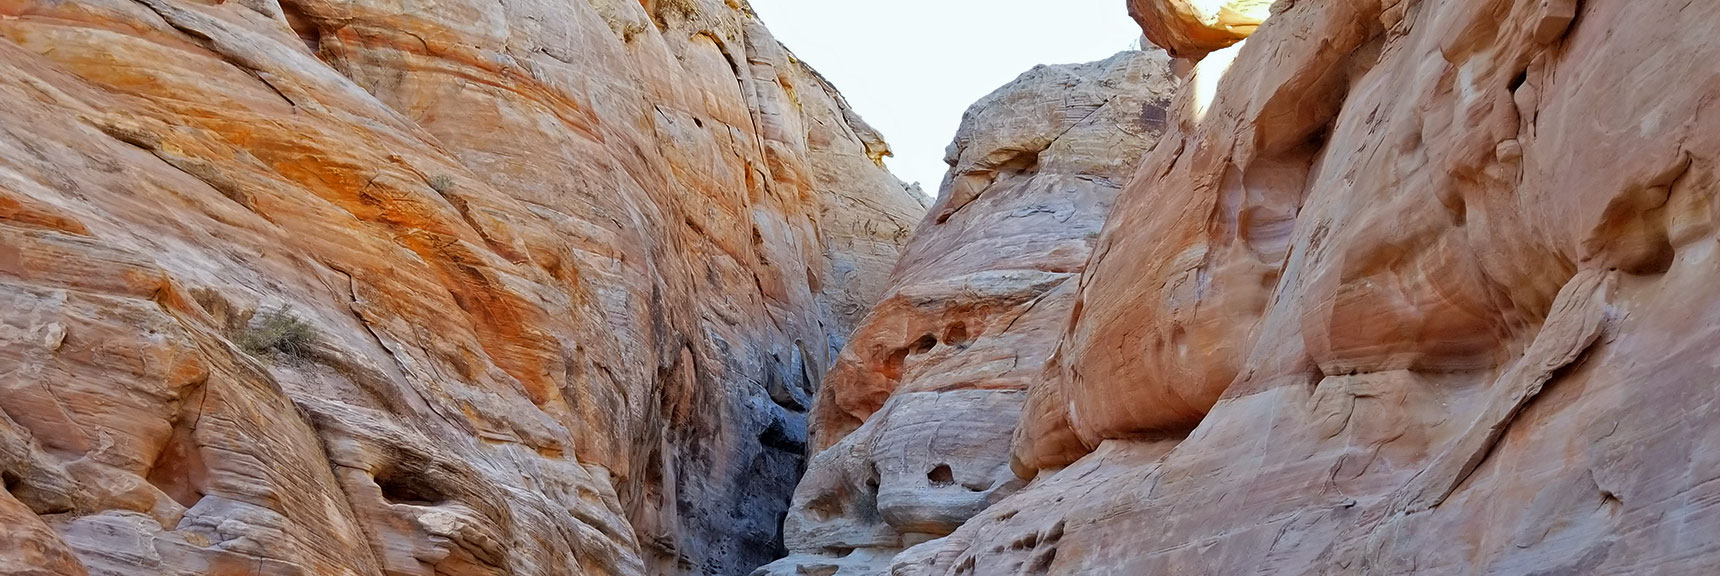 Passing Through the Slot Canyon on White Domes Loop Trail in Valley of Fire State Park, Nevada